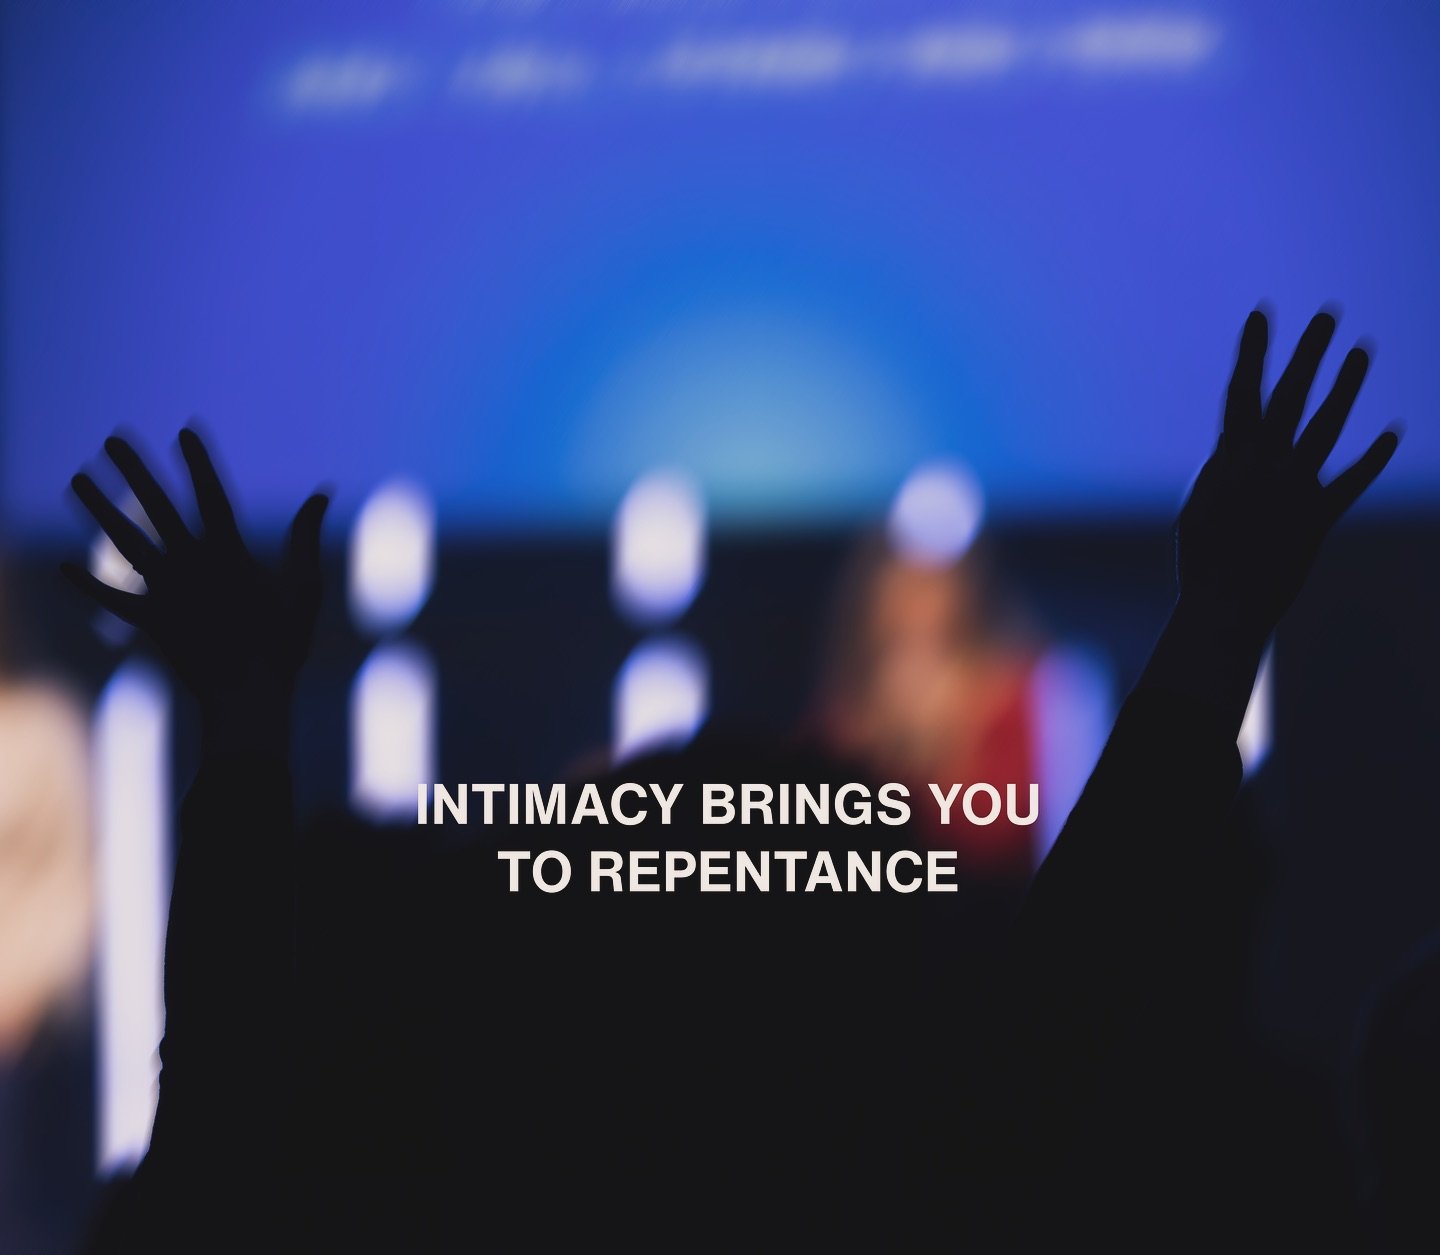 The only thing that can make us whole is Christ. Ara reminded us on Sunday that intimacy with Christ brings us to repentance. 

To walk in a relationship with Christ, is to bear the fruits of Christ. The scripture says, &ldquo;Give us this day our da